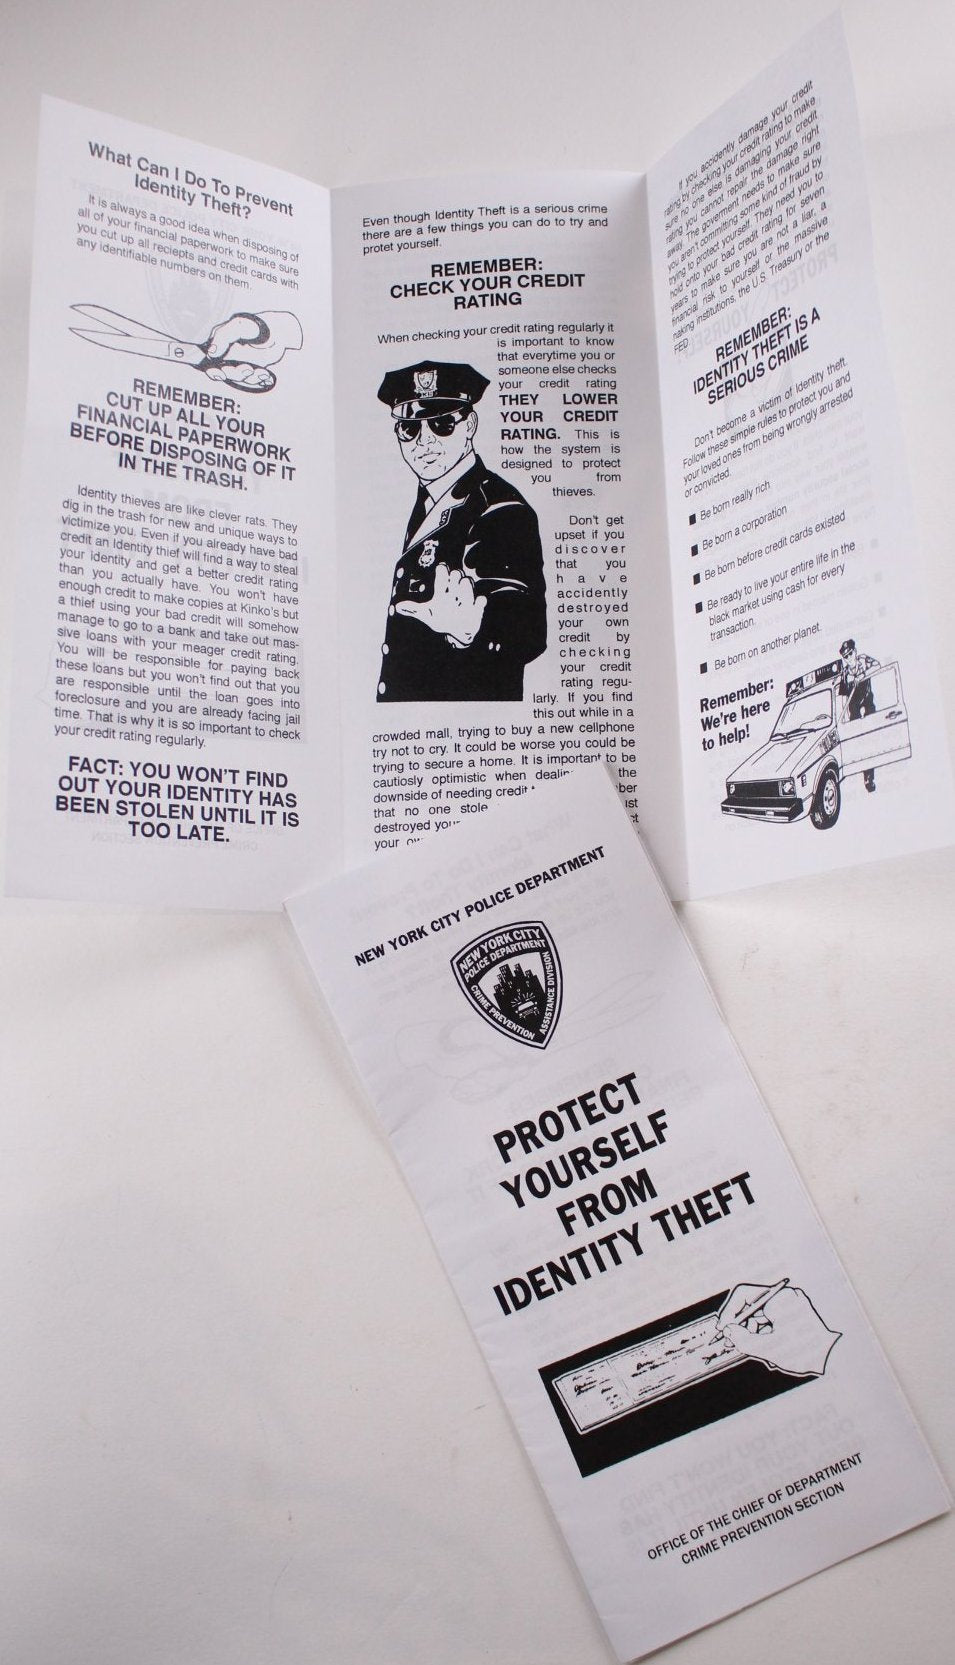 Protect Yourself From Identity Theft pamphlet